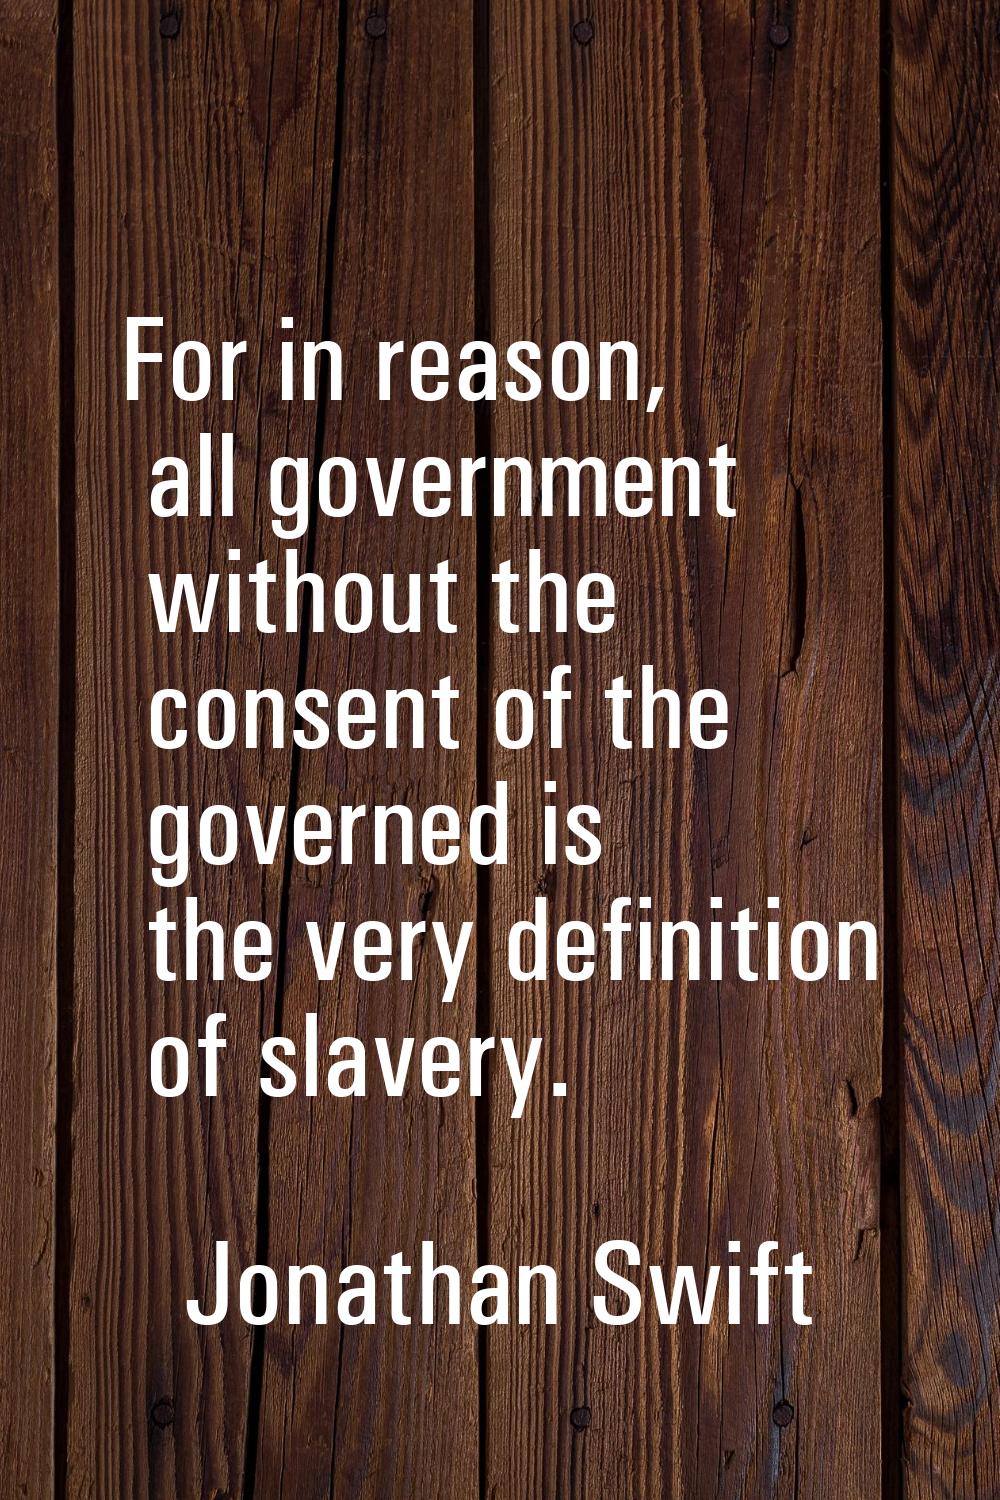 For in reason, all government without the consent of the governed is the very definition of slavery